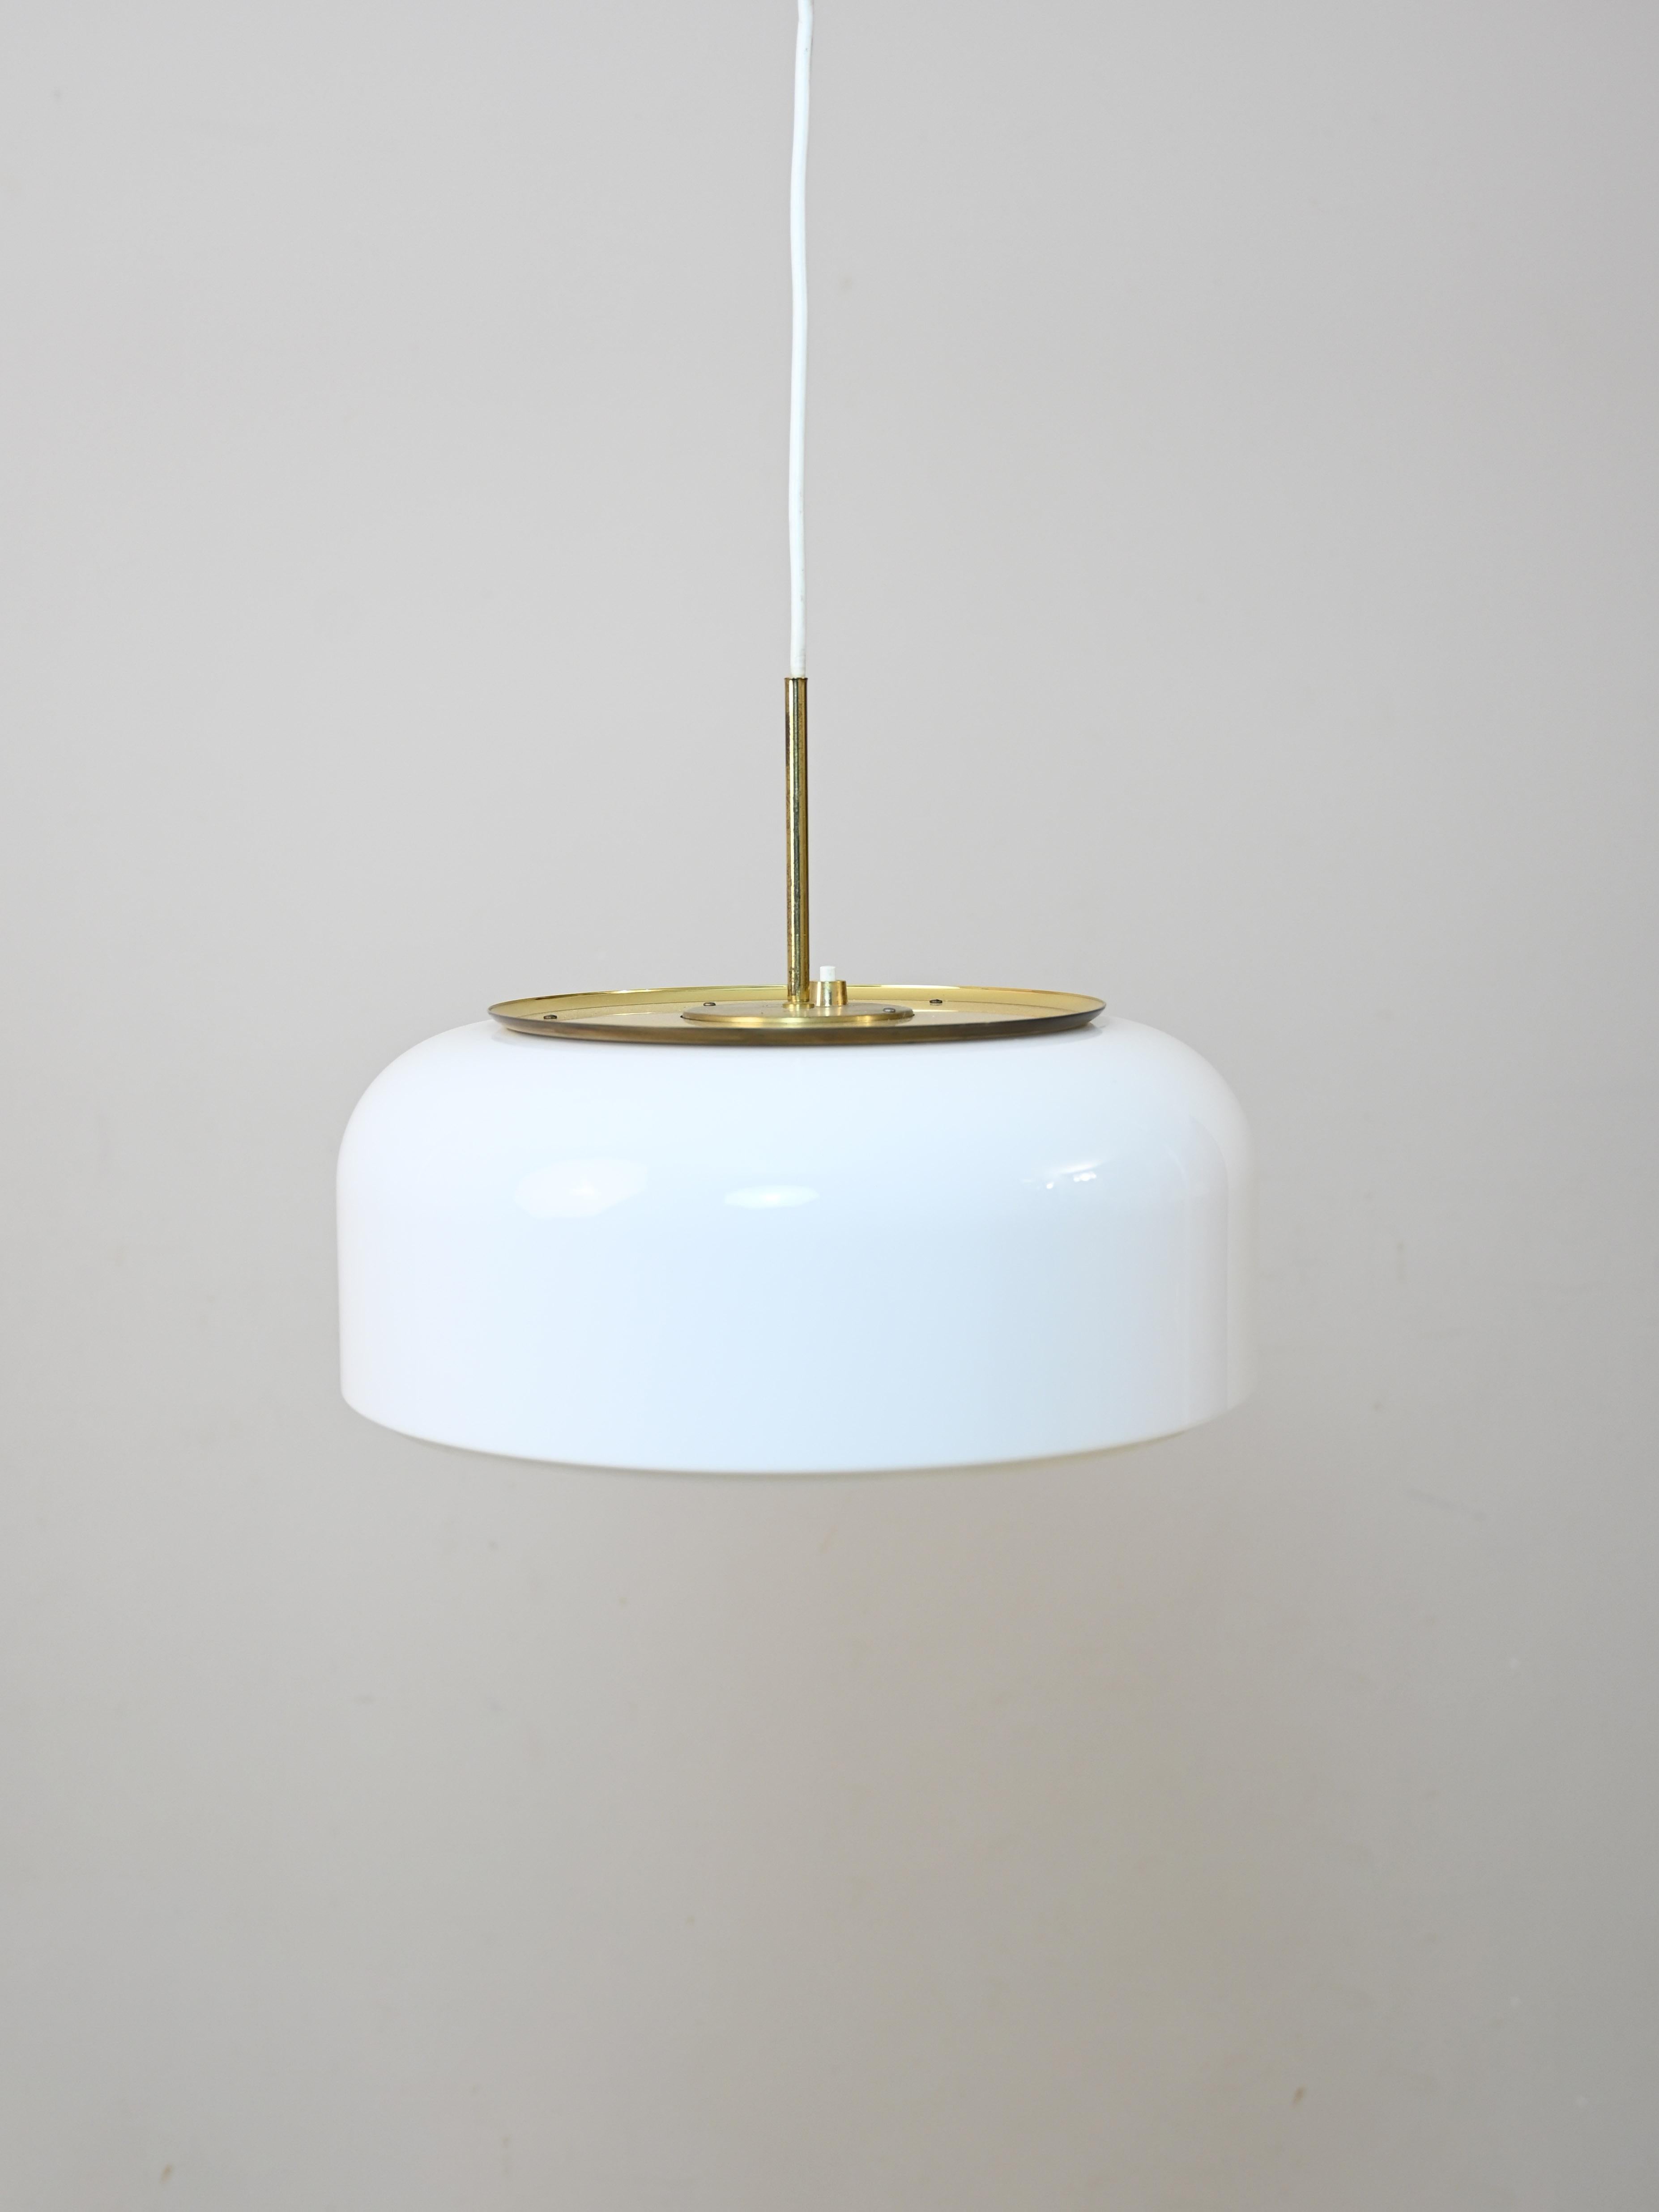 Vintage metal lamp designed by Anders Pehrson for the Swedish factory Ateljé Lyktan in the 1970s. 
Consists of a shade made of gold-plated metal and white-colored hard plastic. 
Ideal for hanging above the dining table to give a modern look in